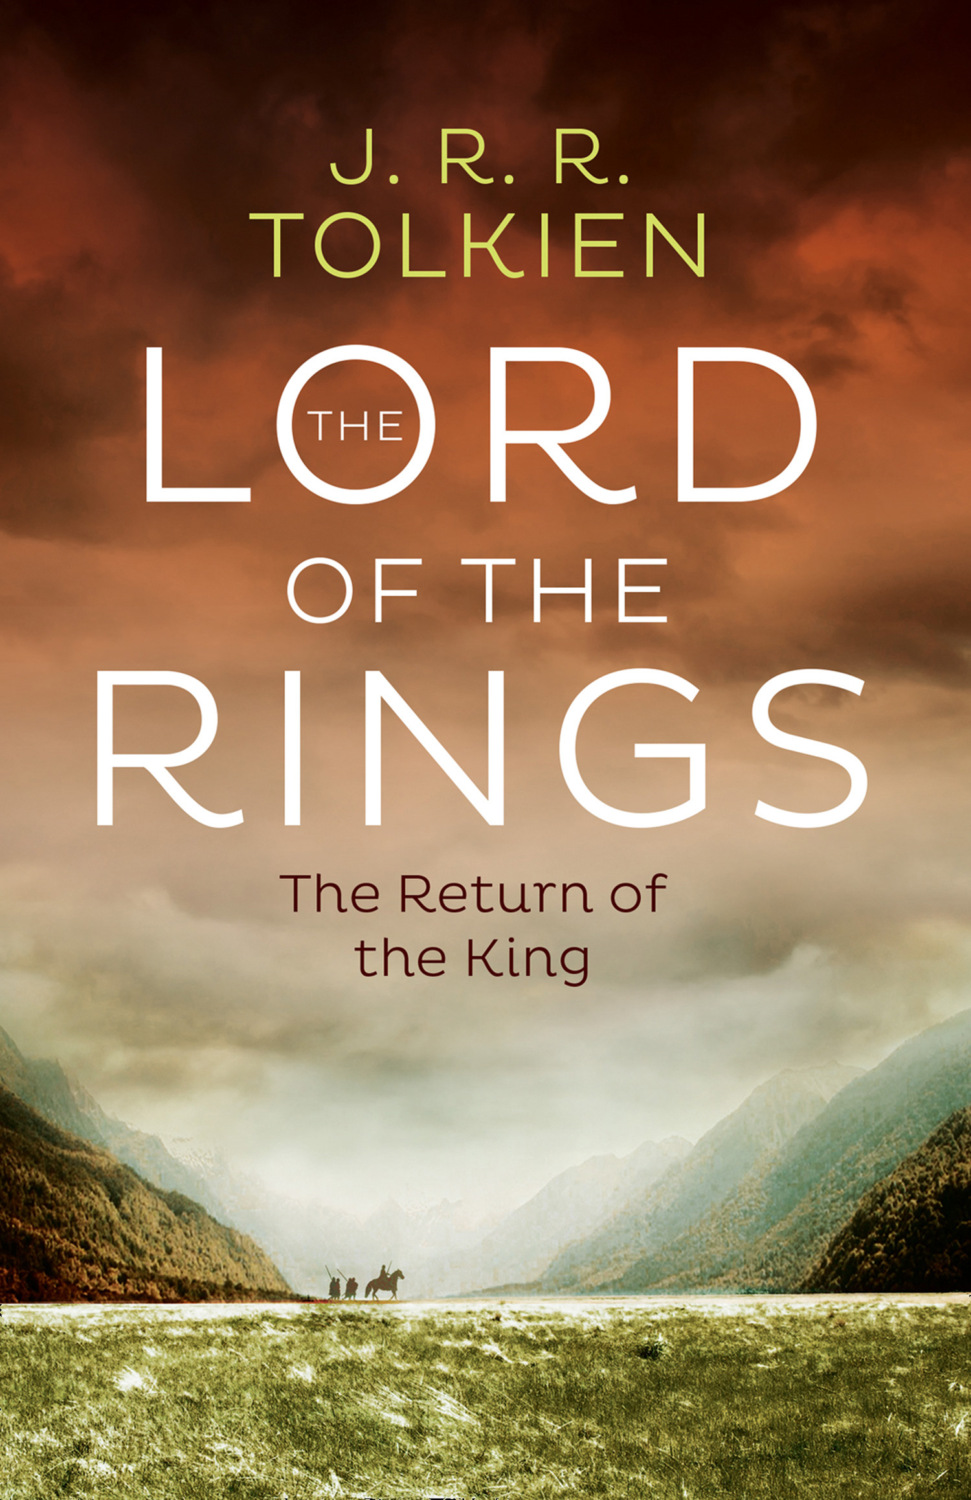 Download The Fellowship of the Ring pdf by J.R.R. Tolkien 